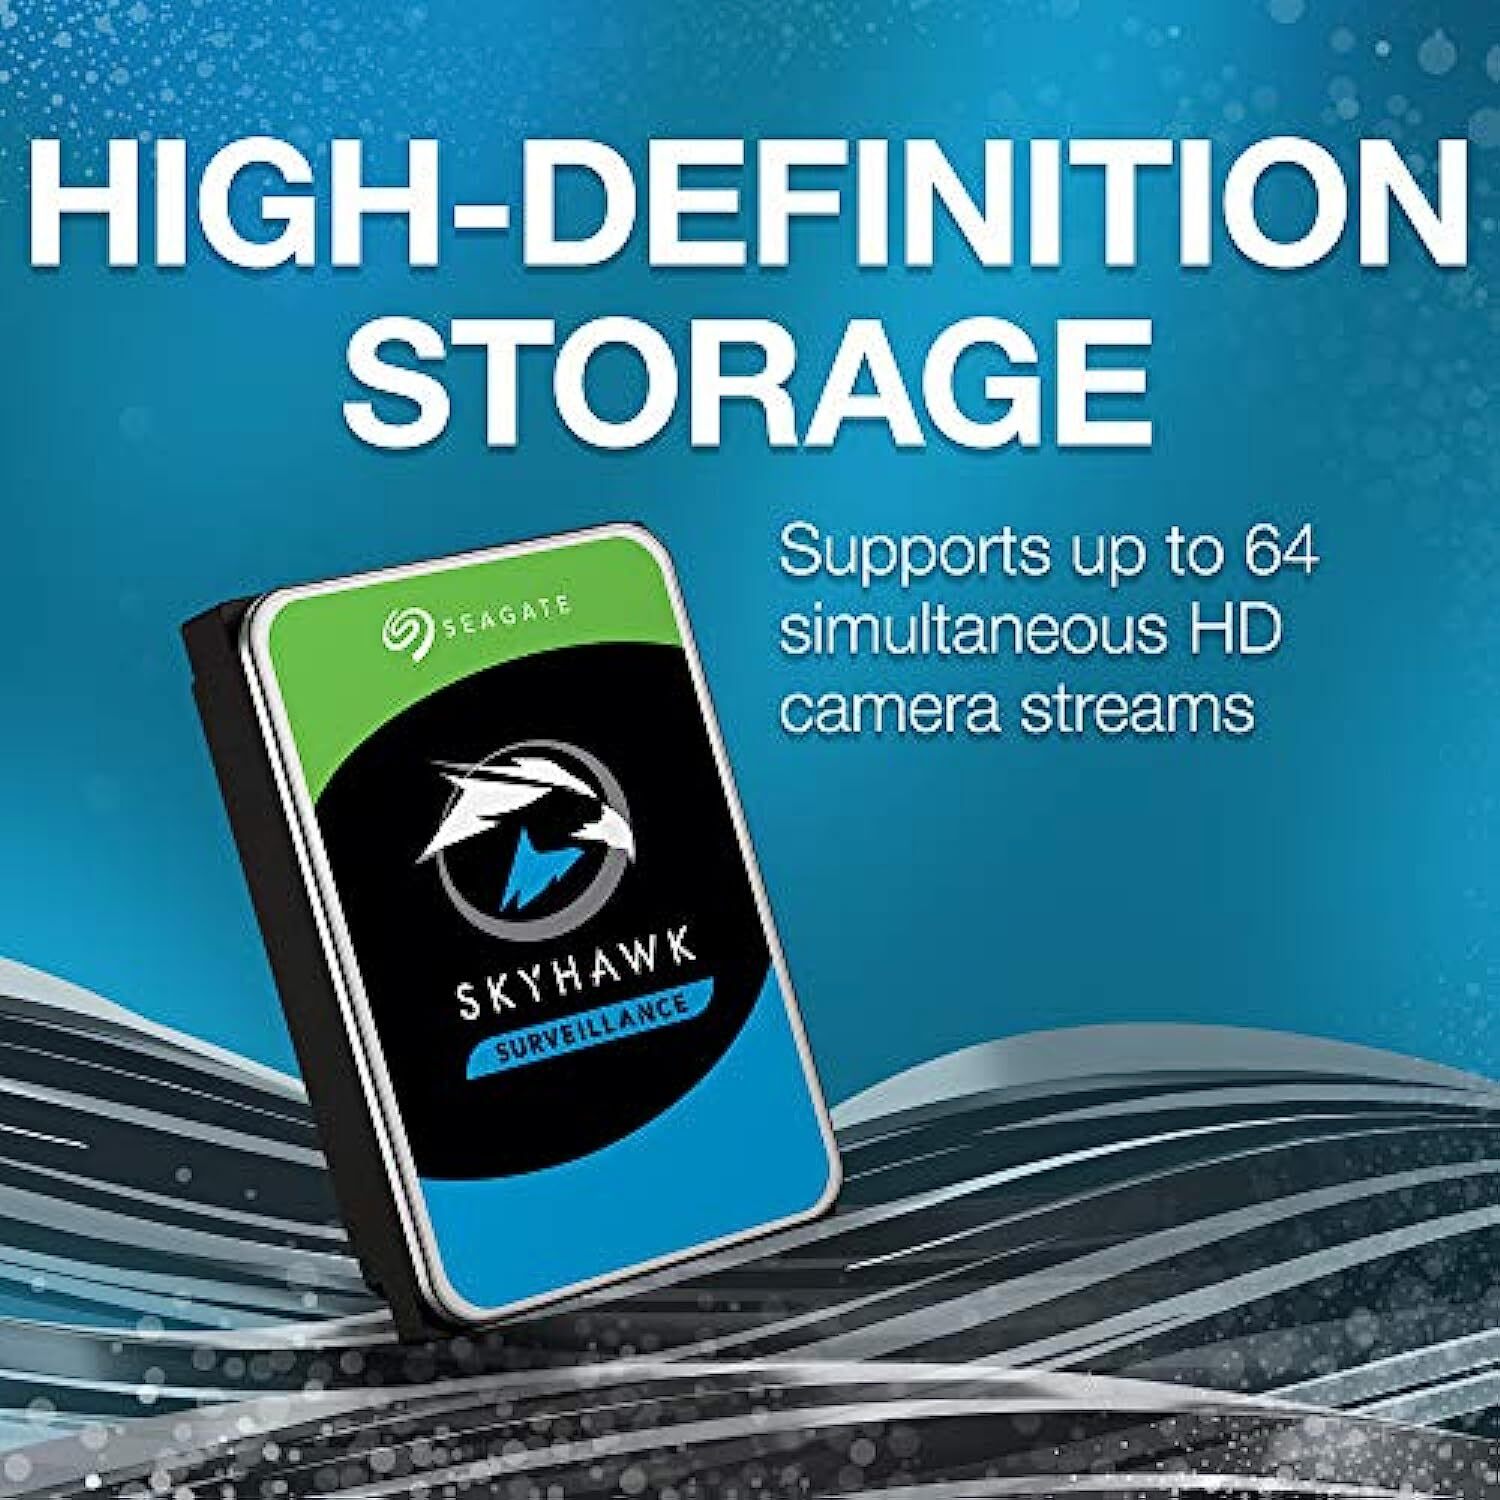 Seagate Skyhawk 8TB Surveillance Internal Hard Drive HDD – 3.5 Inch SATA 6Gb/s 256MB Cache for DVR NVR Security Camera System with Drive Health Management (ST8000VX0022)